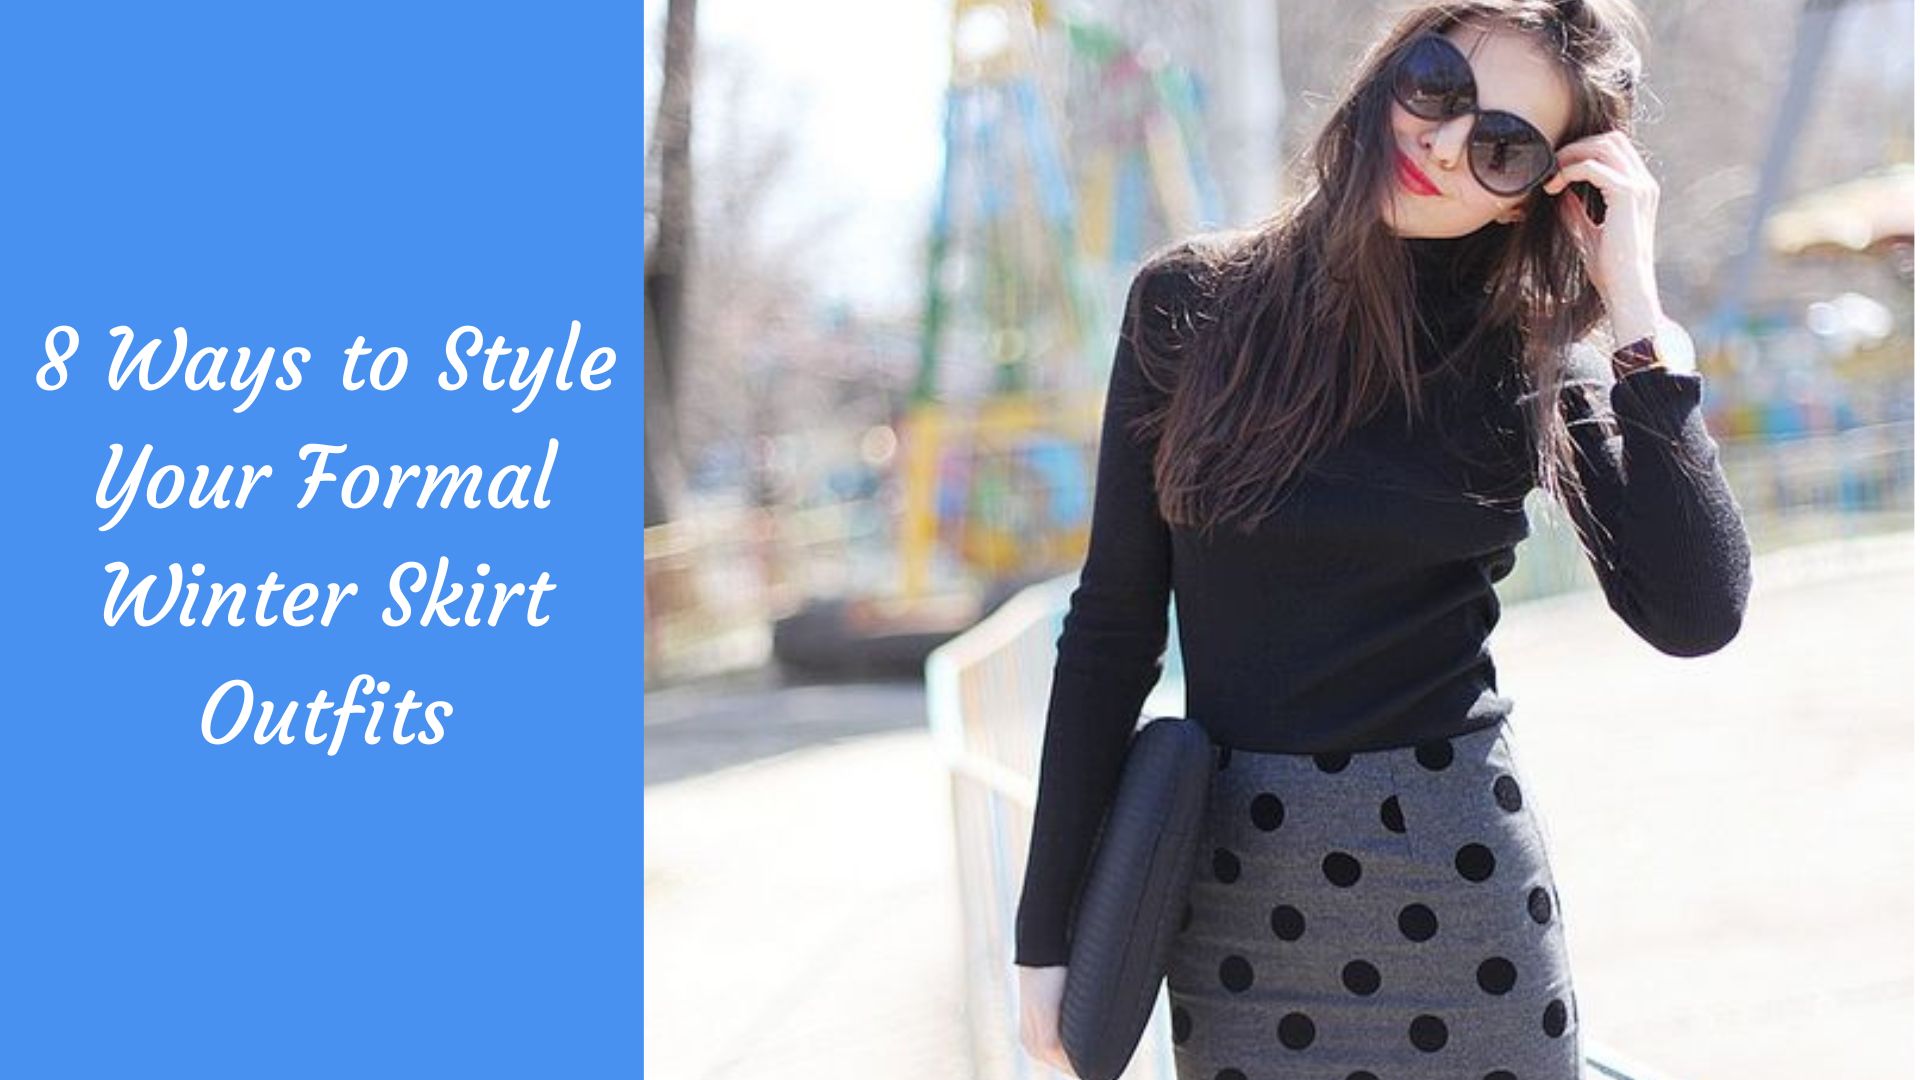 How to Wear Skirt Outfits for Winter: 12 Best Ideas - The Kosha Journal